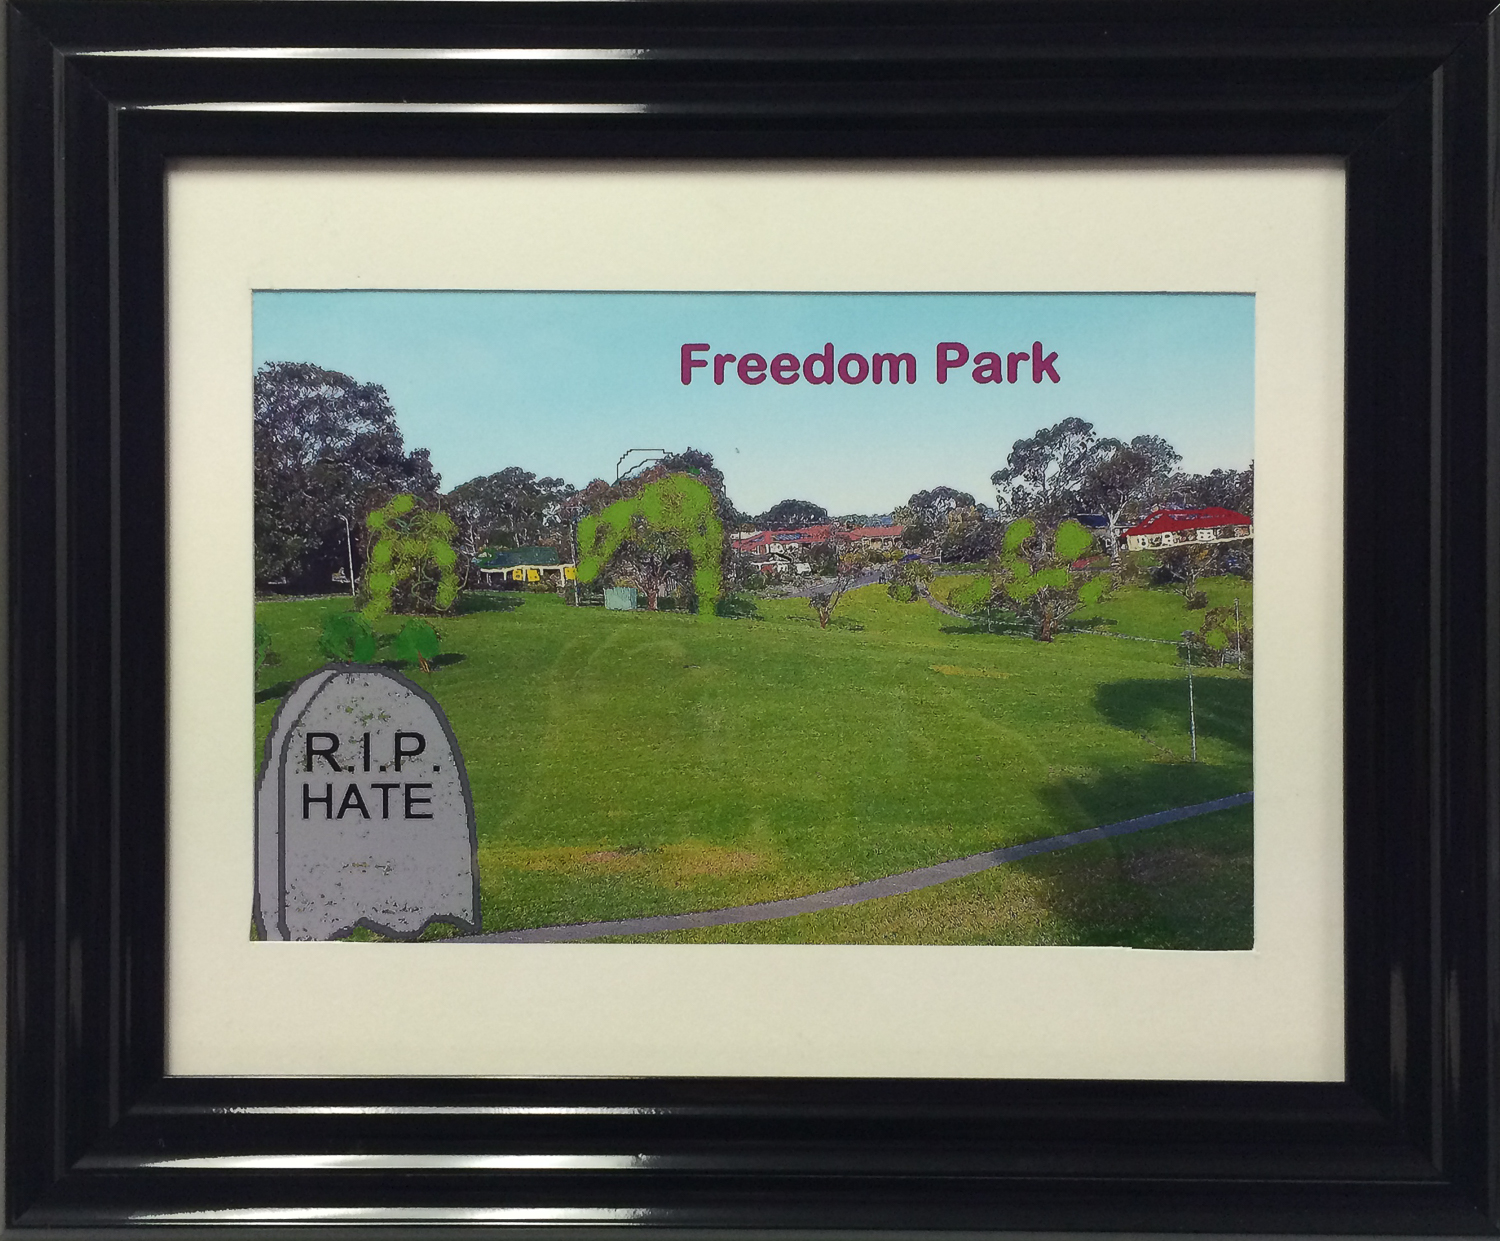 Painting of park with a tombstone that says RIP hate